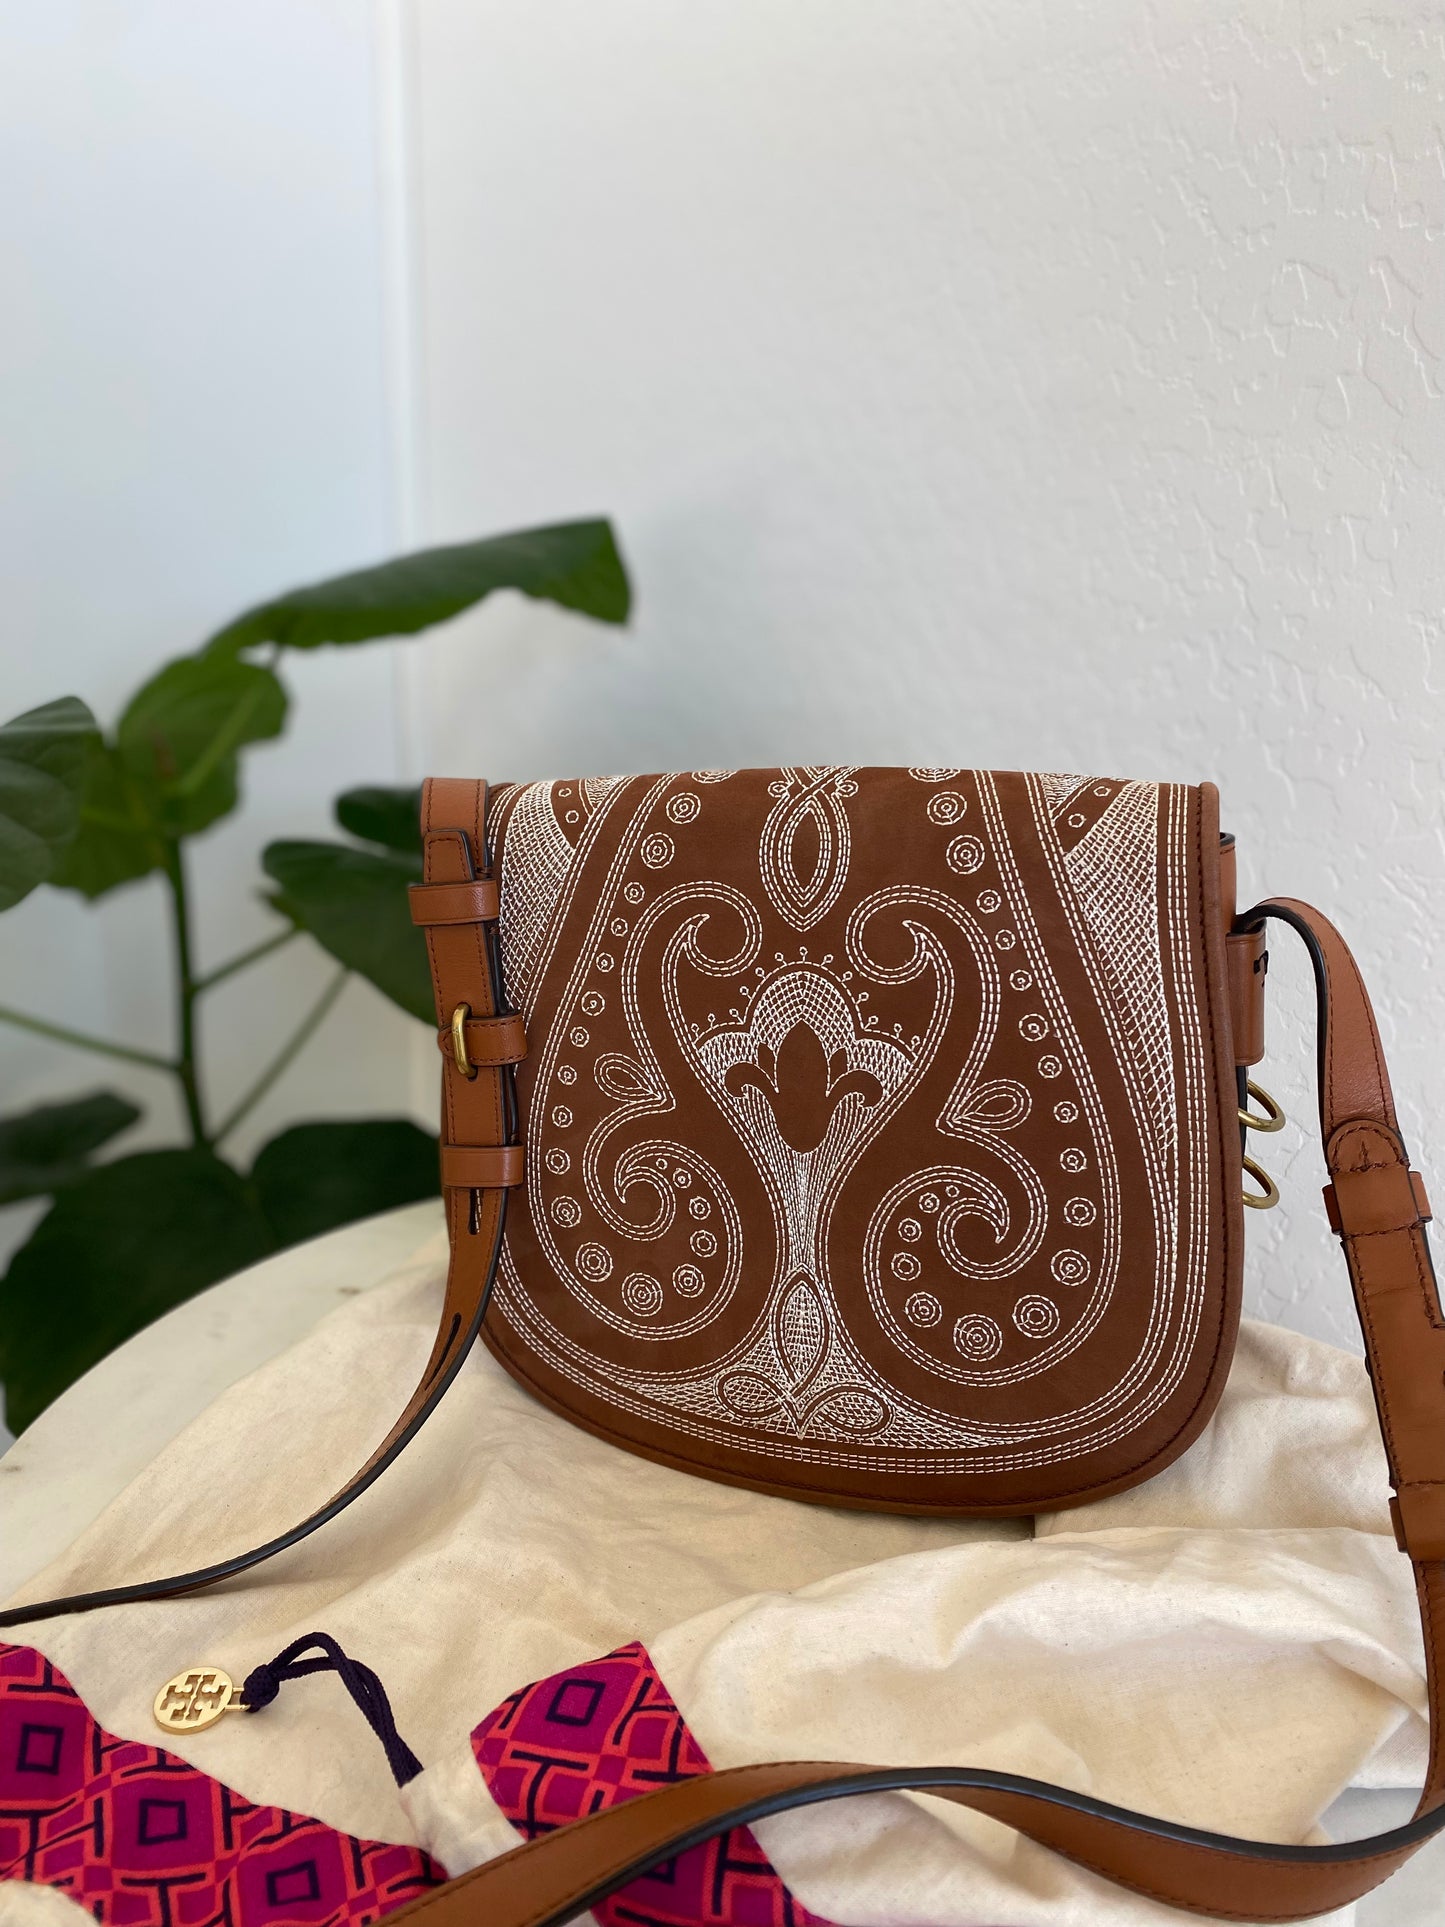 Tory Burch Folk Luxe Suede Saddle Bag